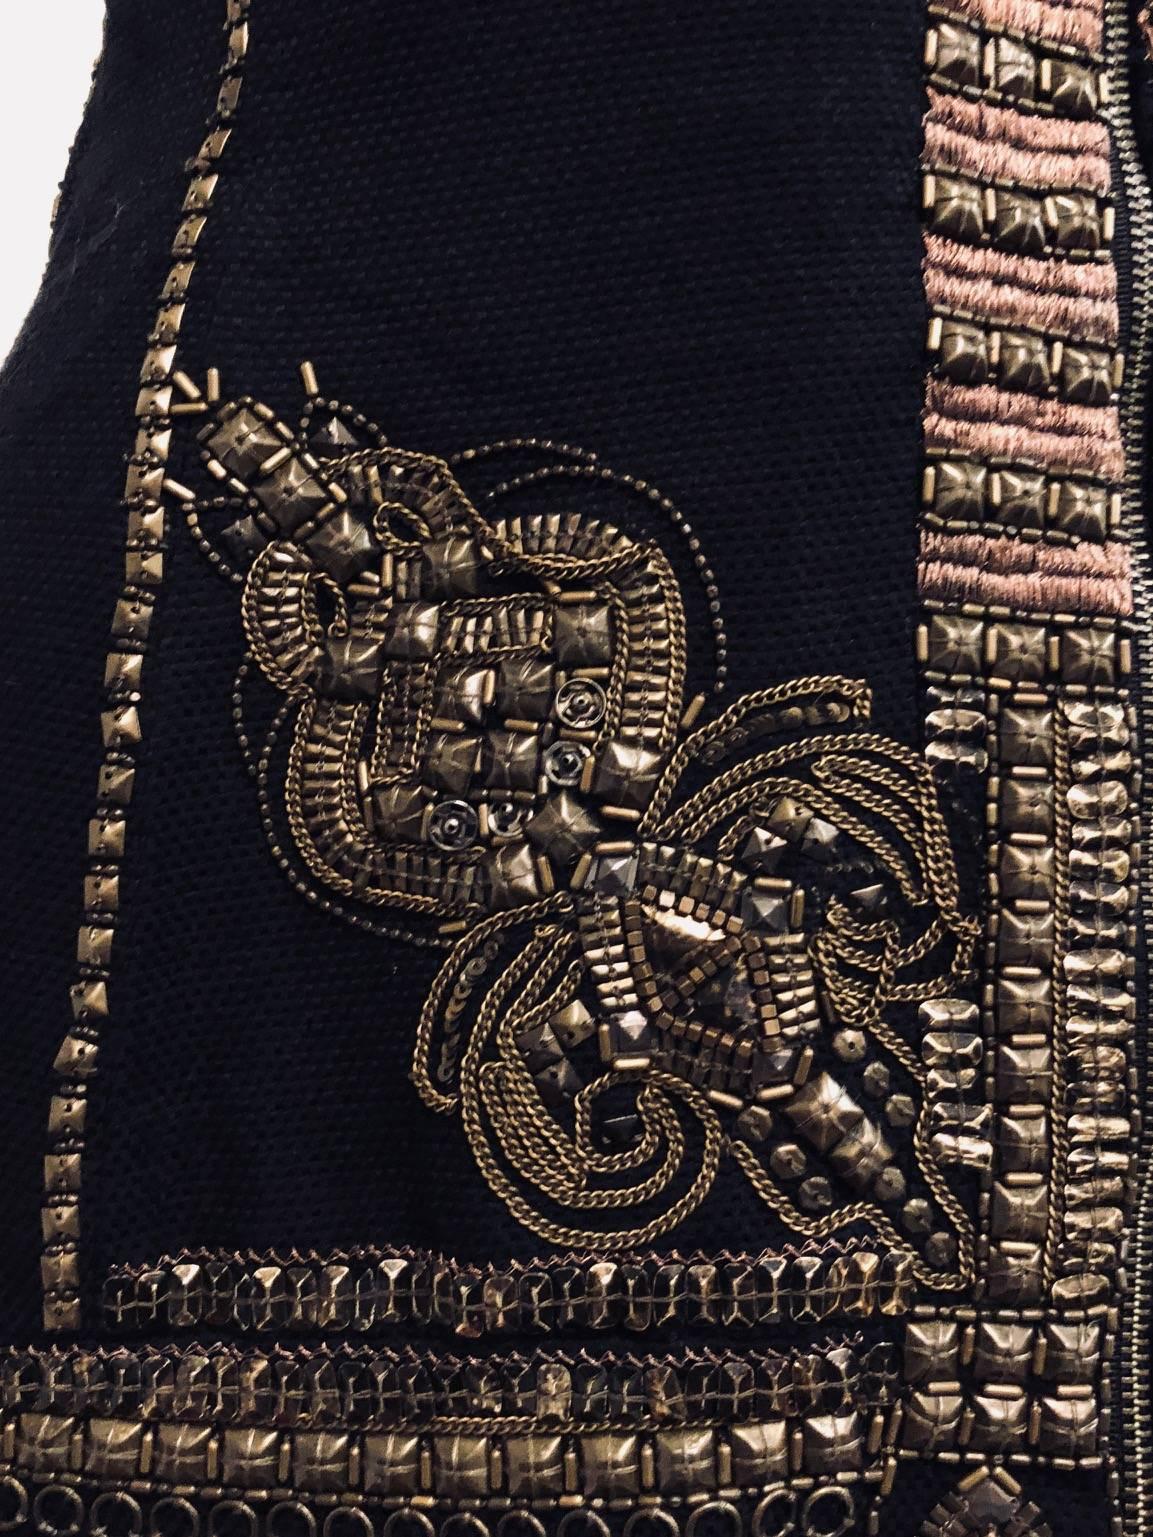 This Dries van Noten black wool and cotton blend vest contains intricate designs of beads and different metal ornaments on the front and back of this vest.   The multi layered bronze tone metal decorations on the front closure of this vest also